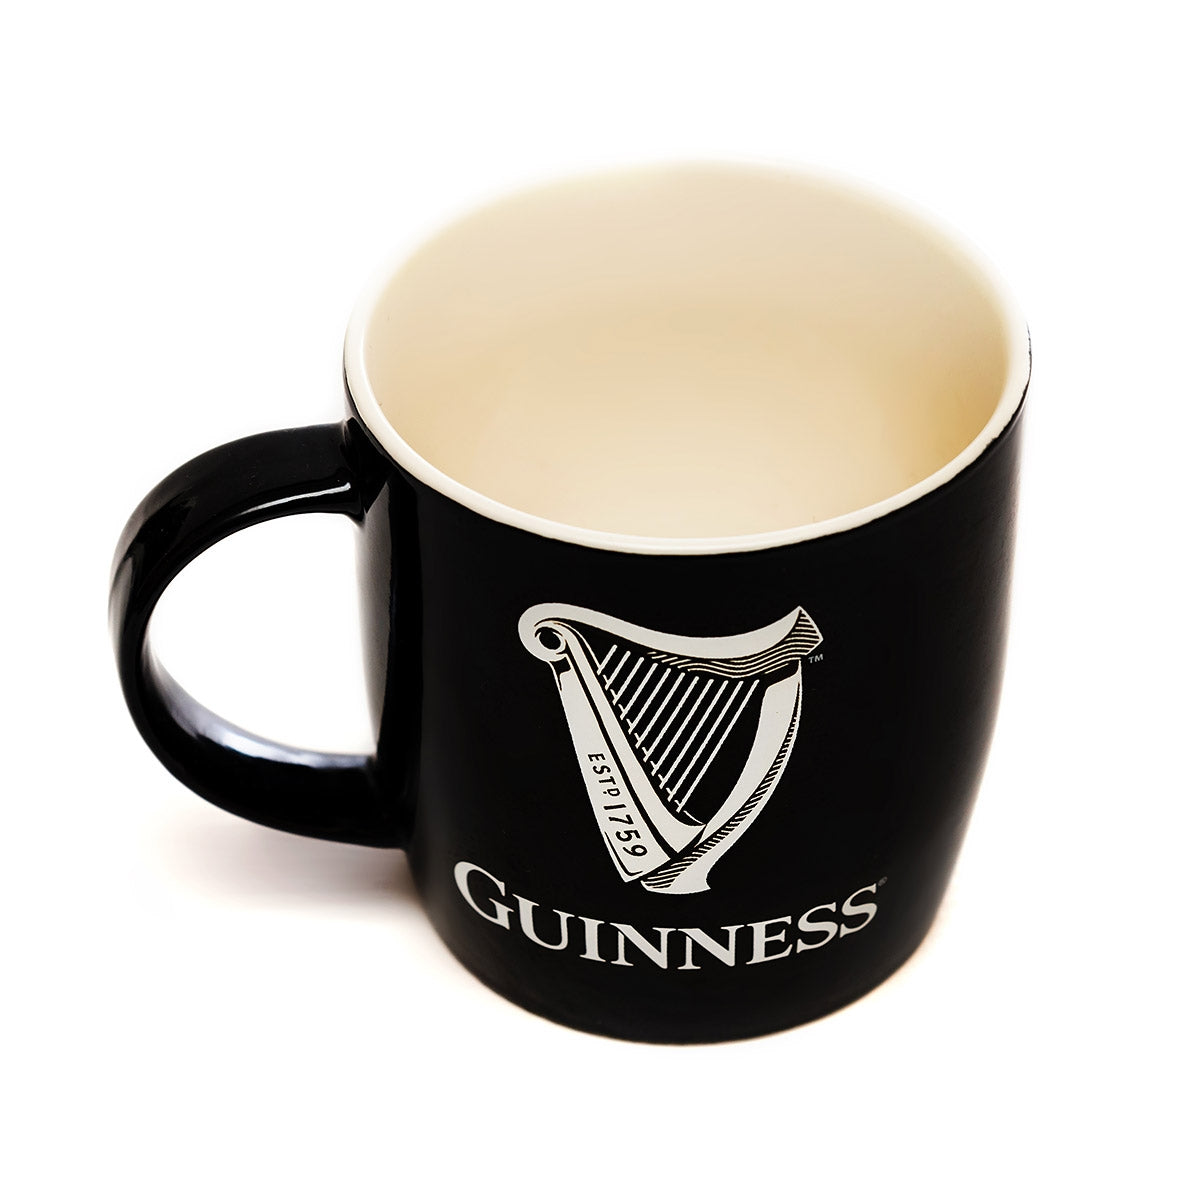 A Guinness Black Mug with White Harp Logo is displayed on a white background.